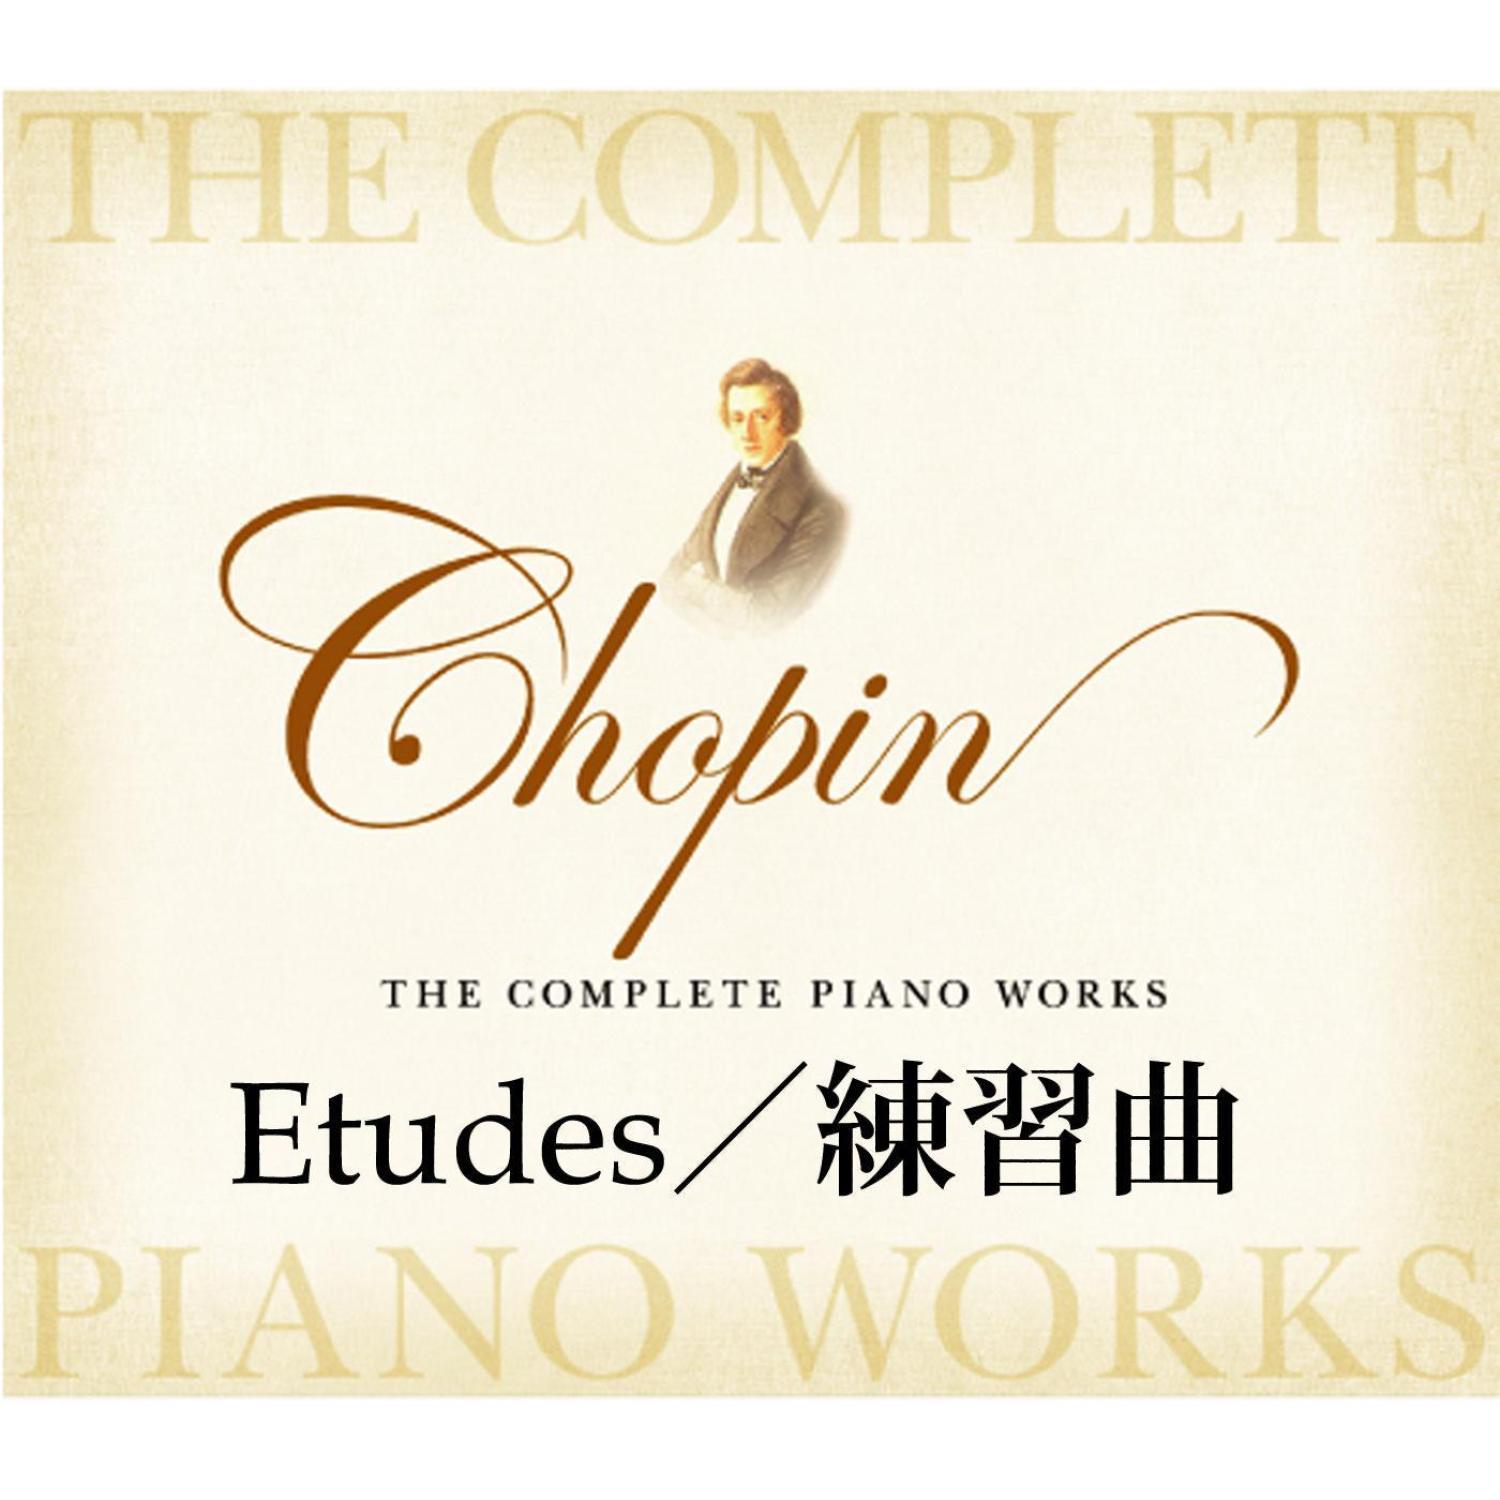 Chopin The Complete Piano Works Etudes